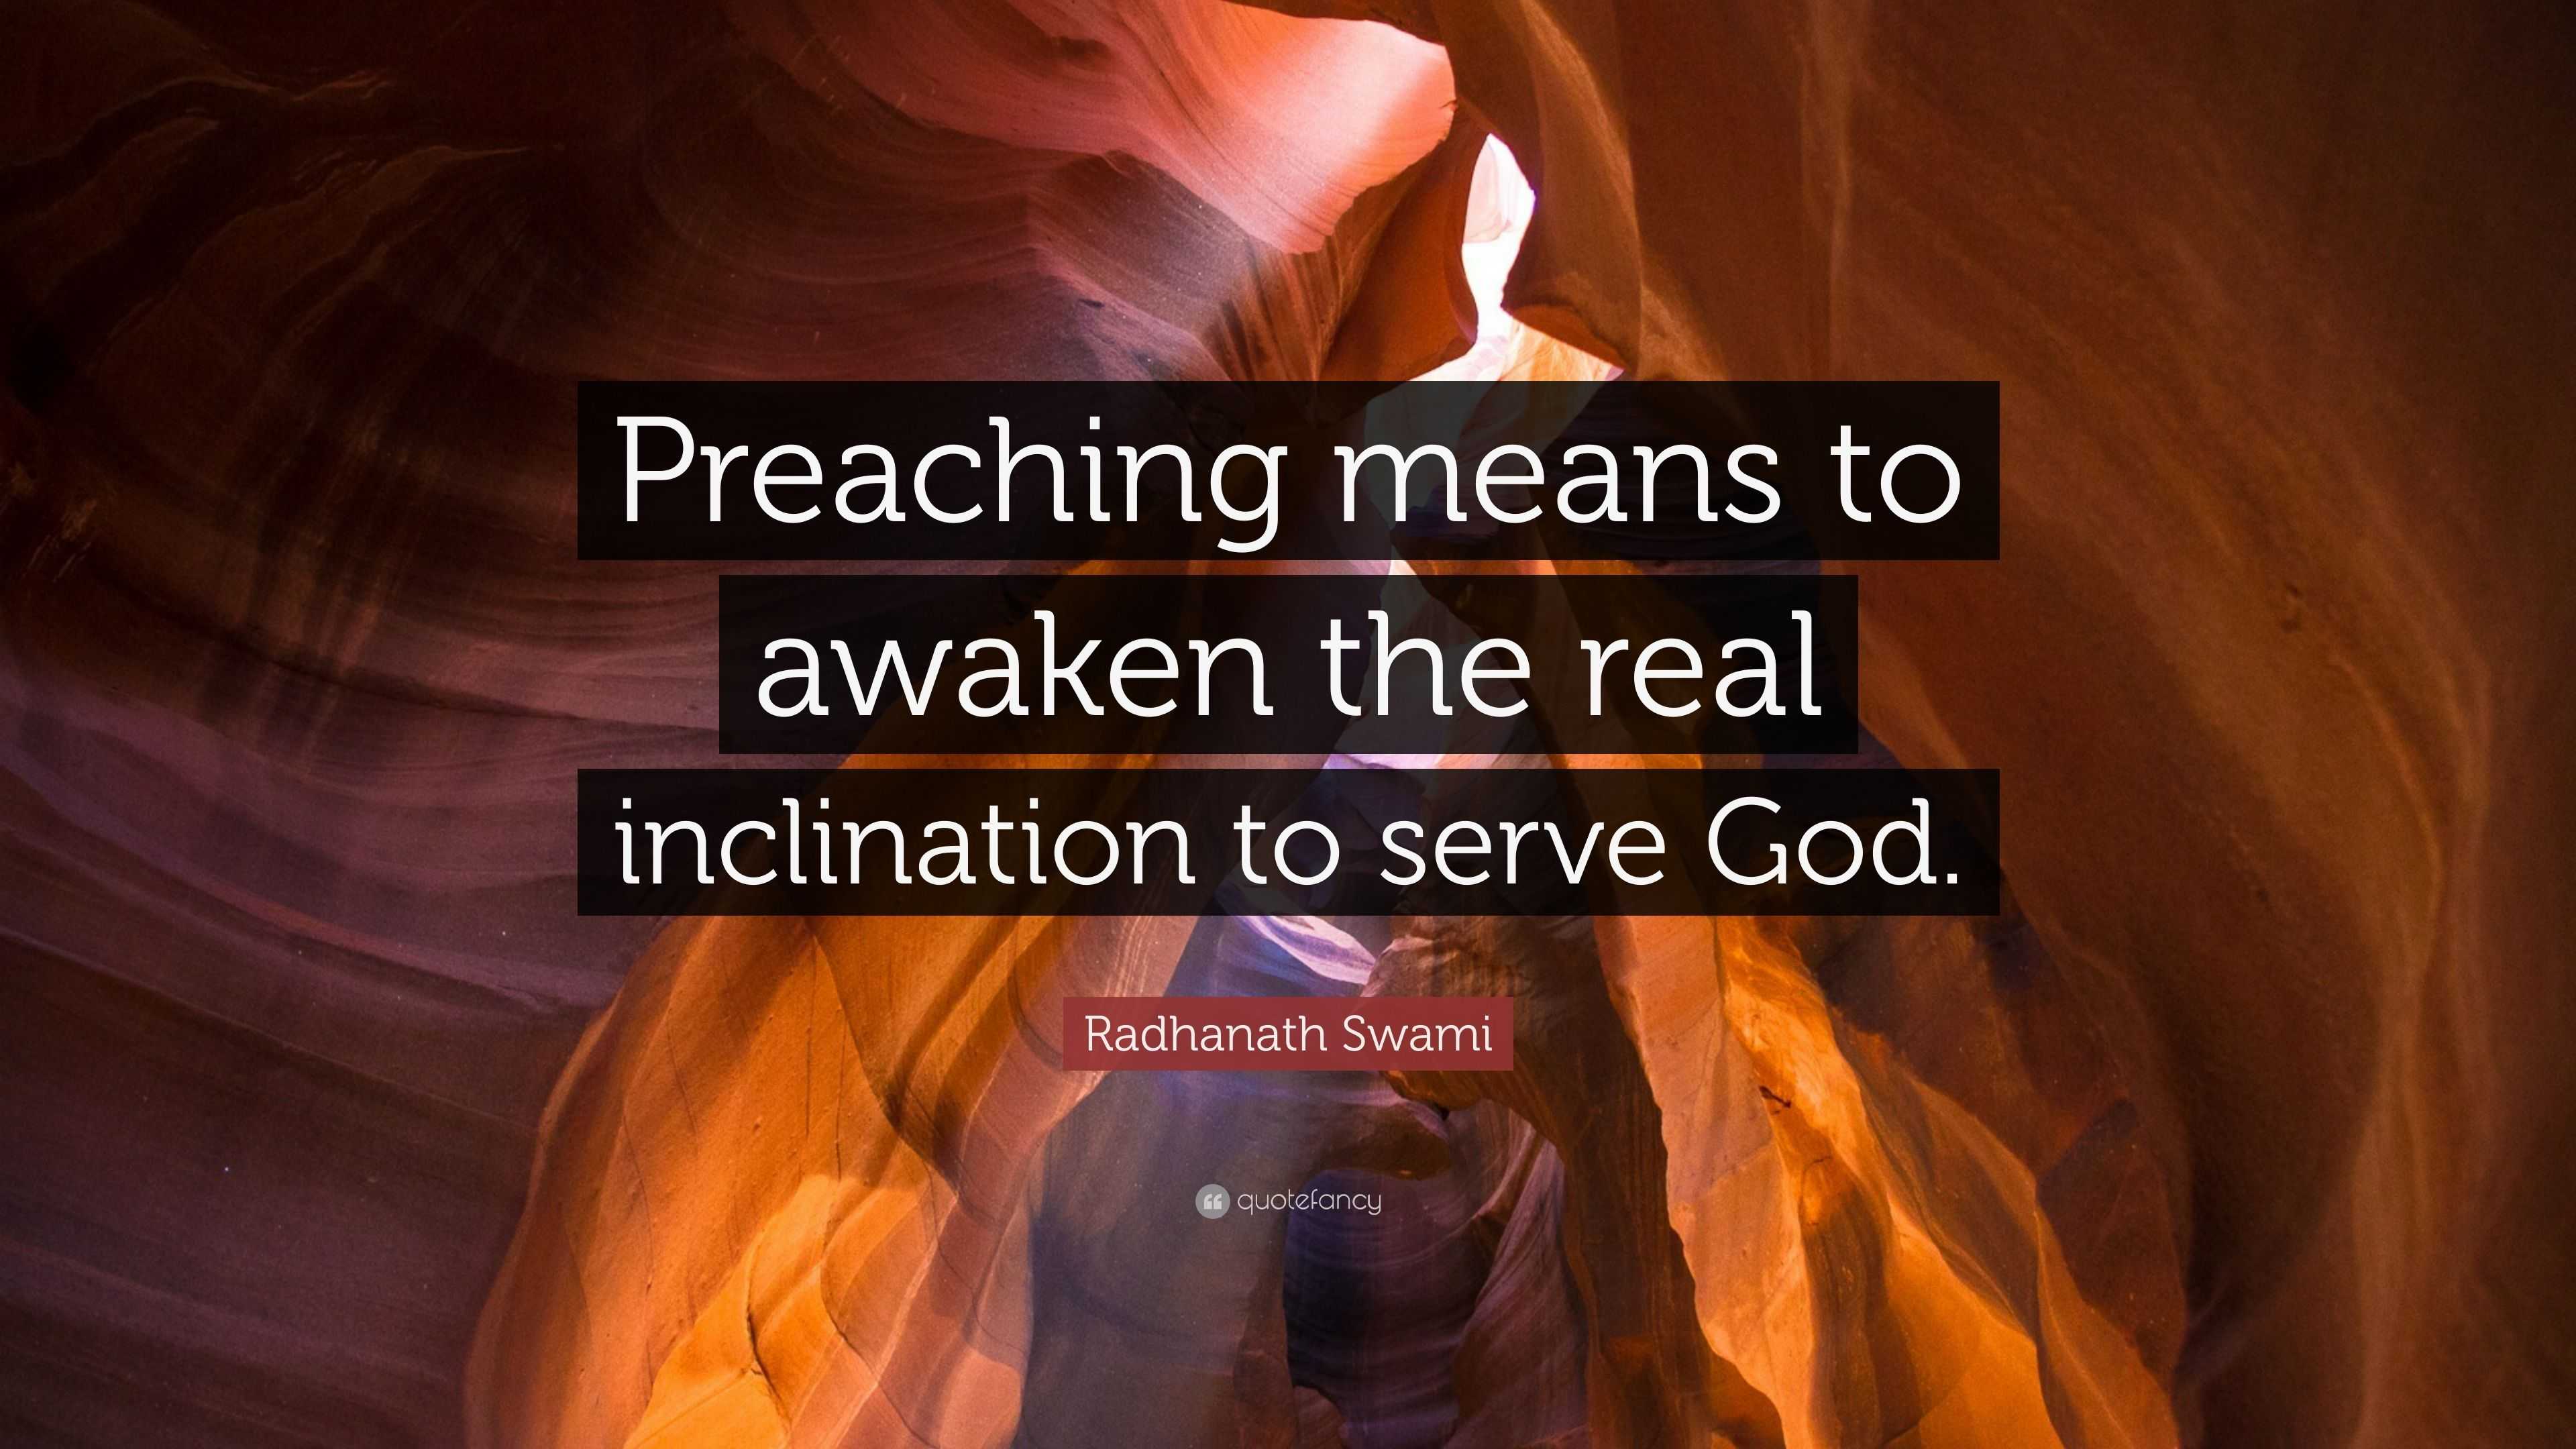 Radhanath Swami Quote: “Preaching means to awaken the real inclination